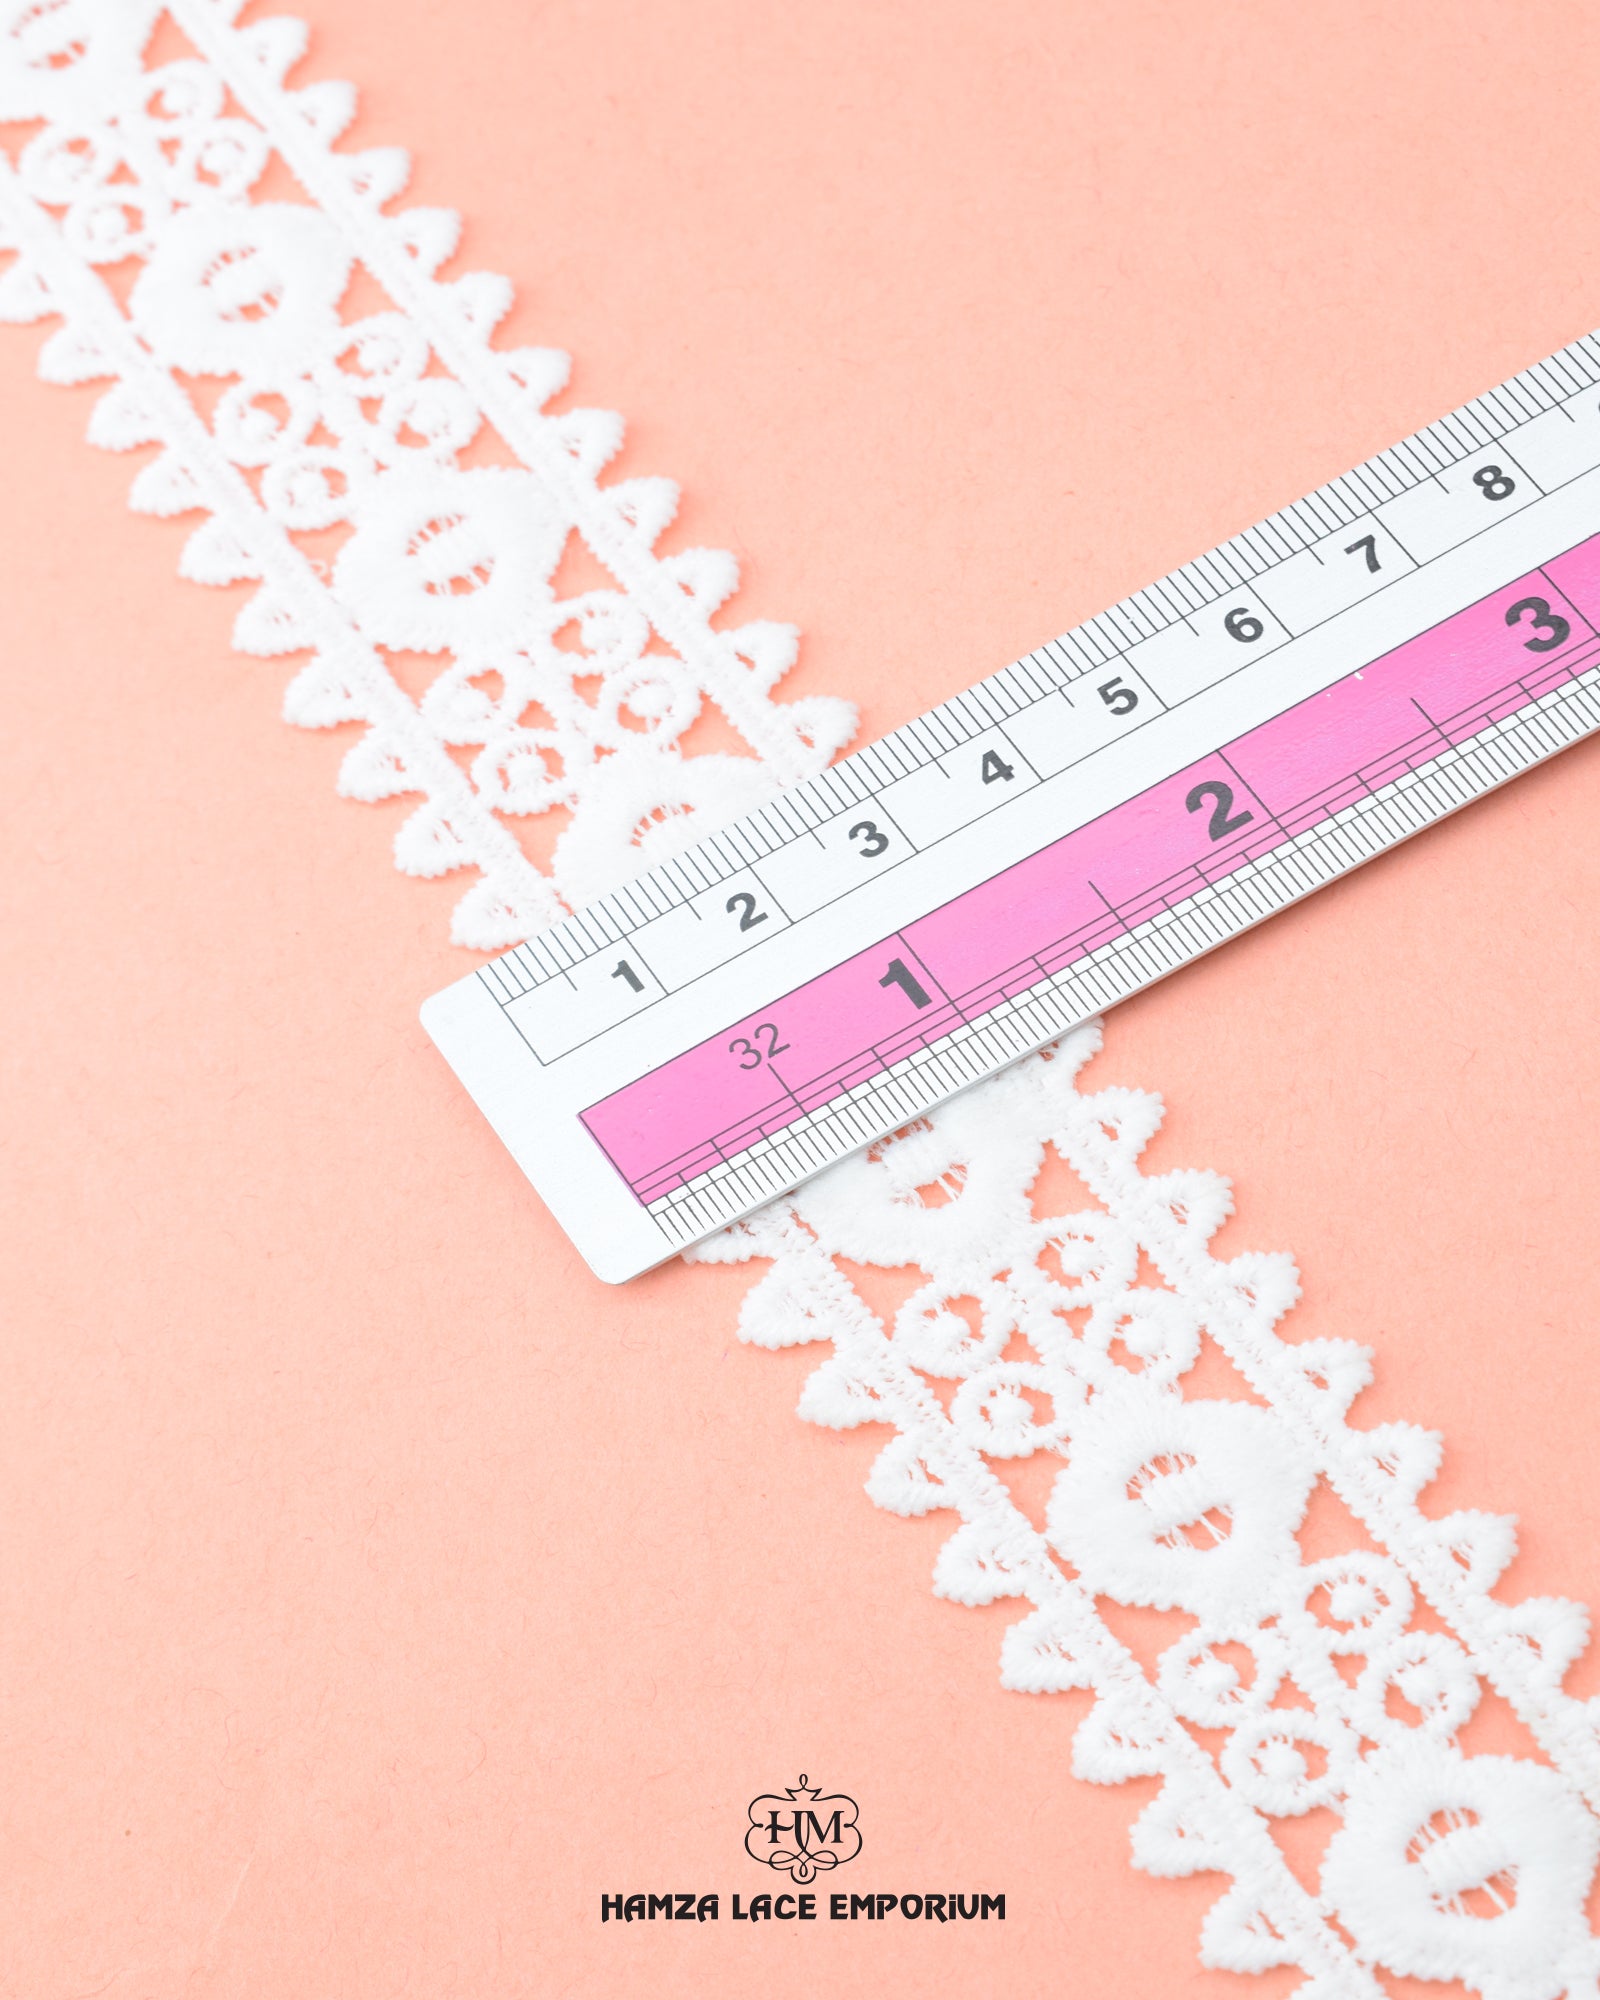 Size of the 'Center Filling Lace 23129' is given as '1.25' inches by placing a ruler on it